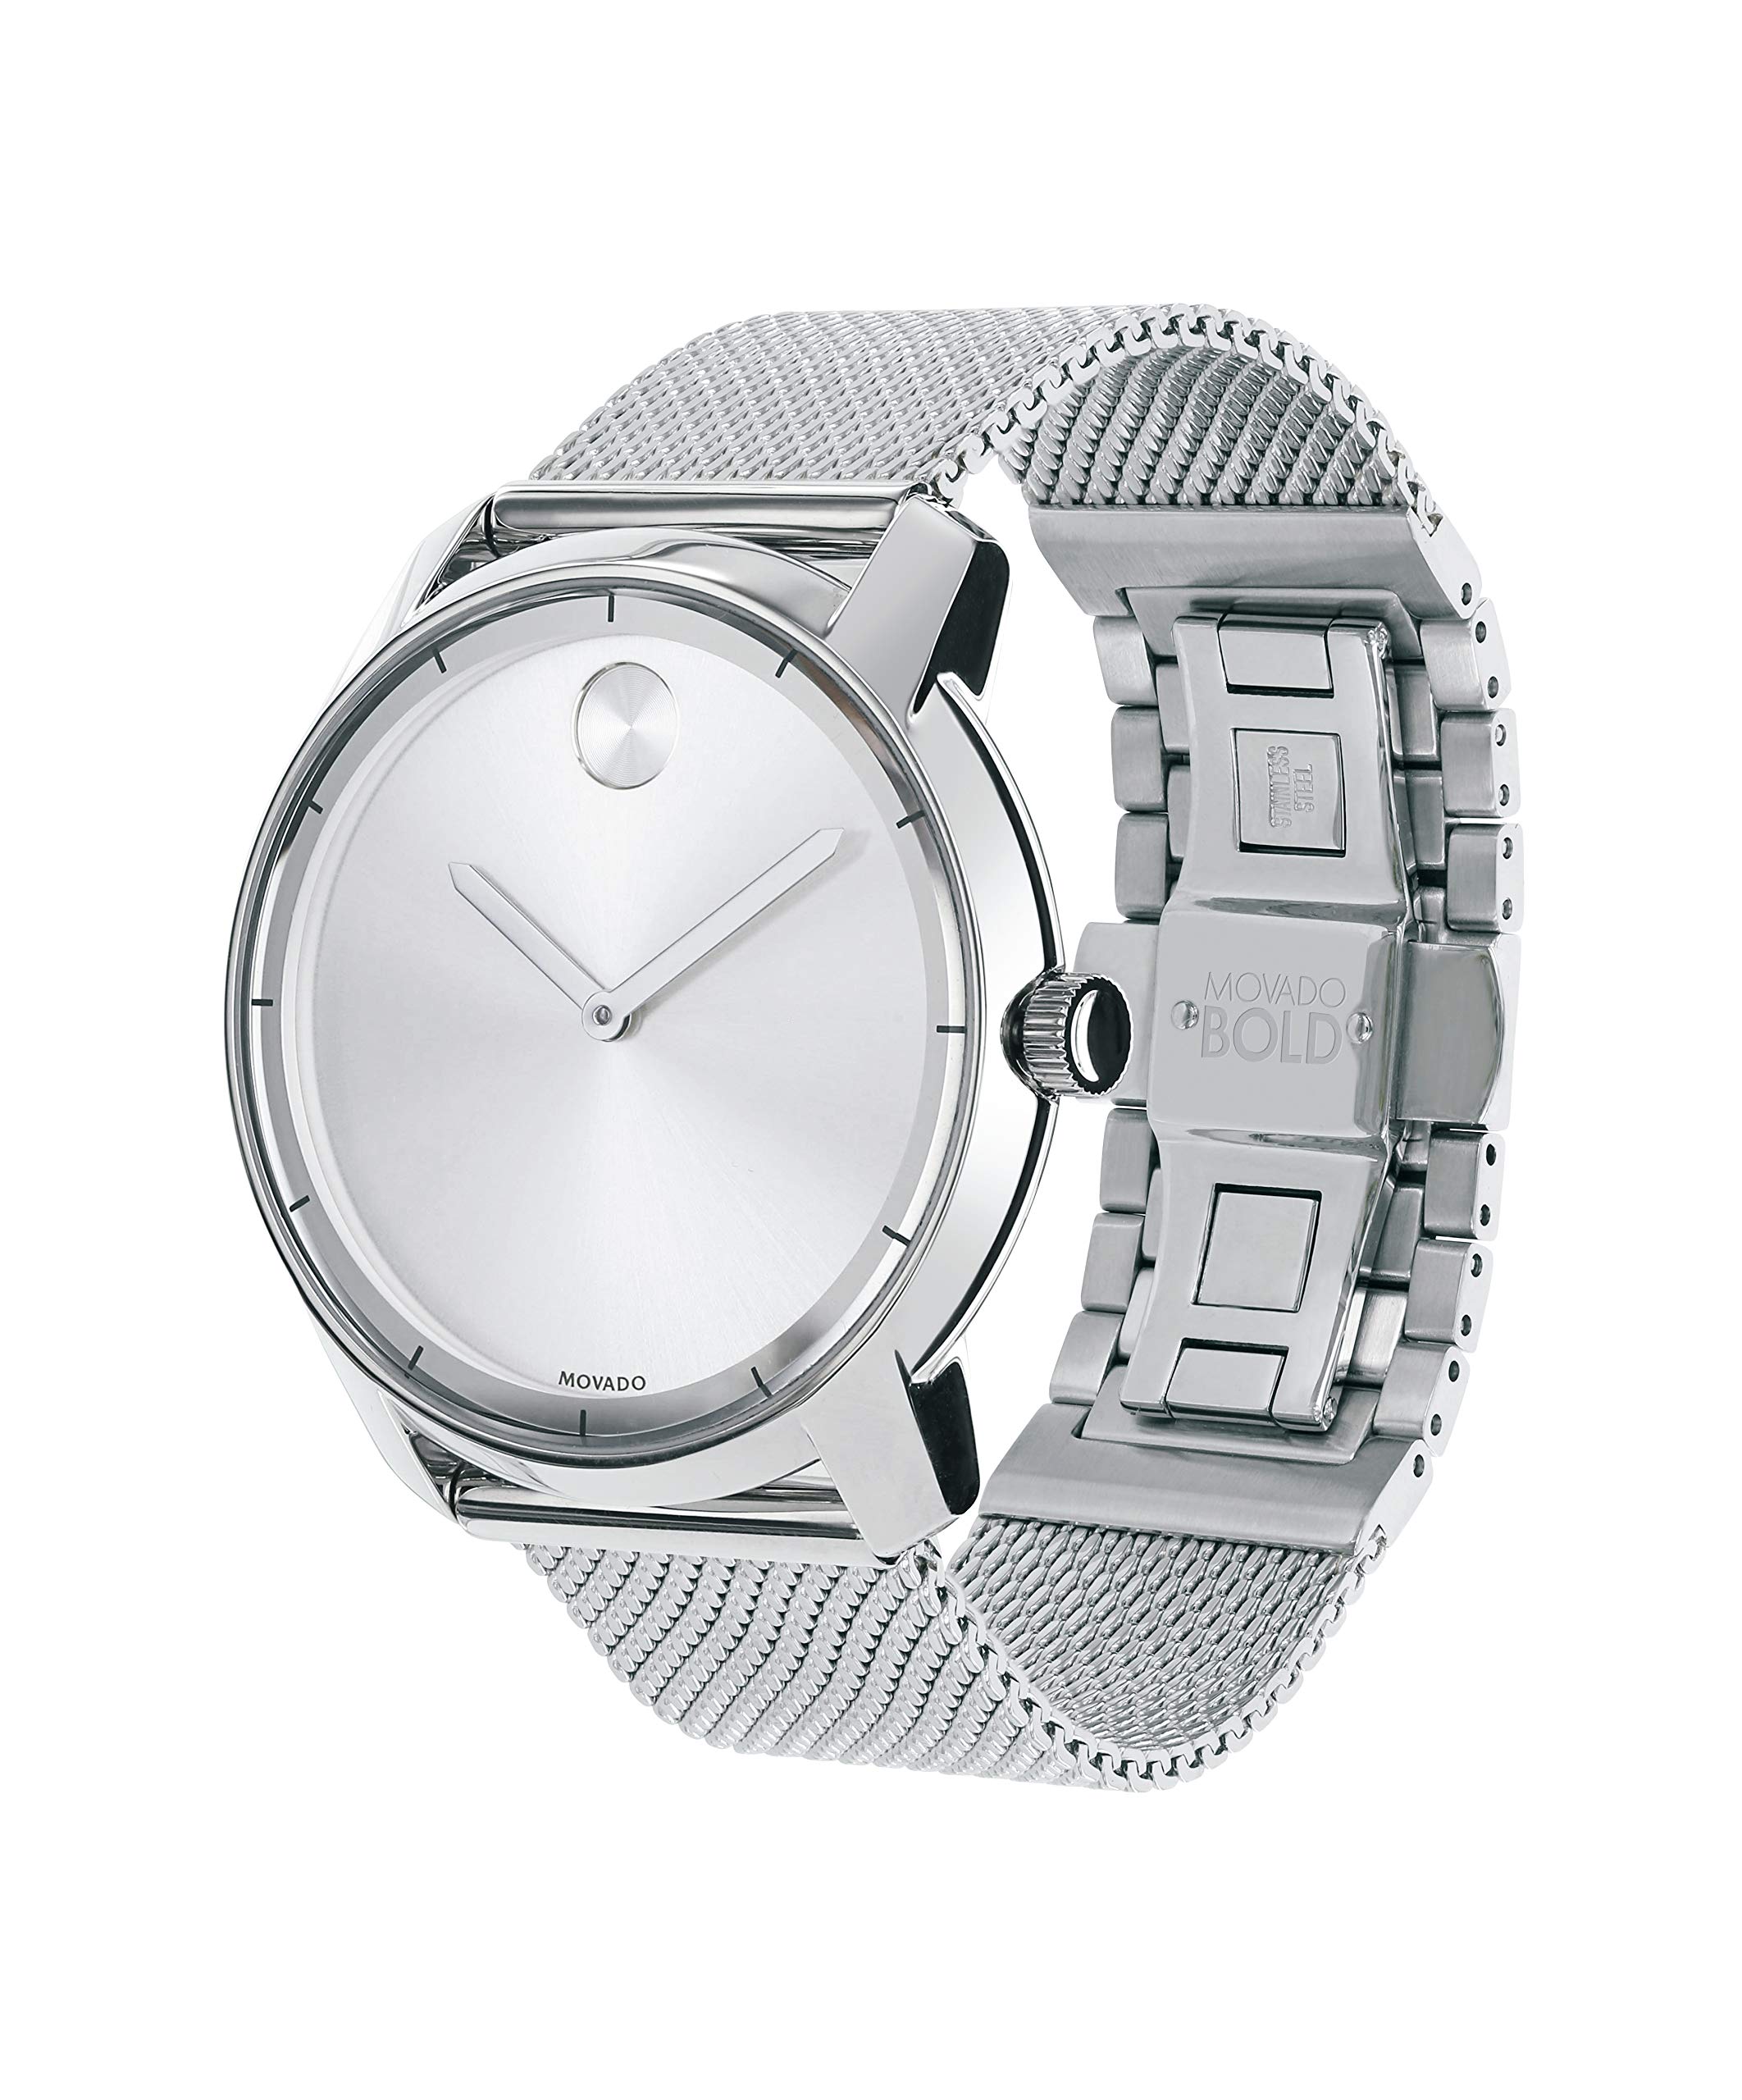 Movado Men's BOLD Thin Stainless Steel Watch with a Printed Index Dial, Silver (Model 3600260)